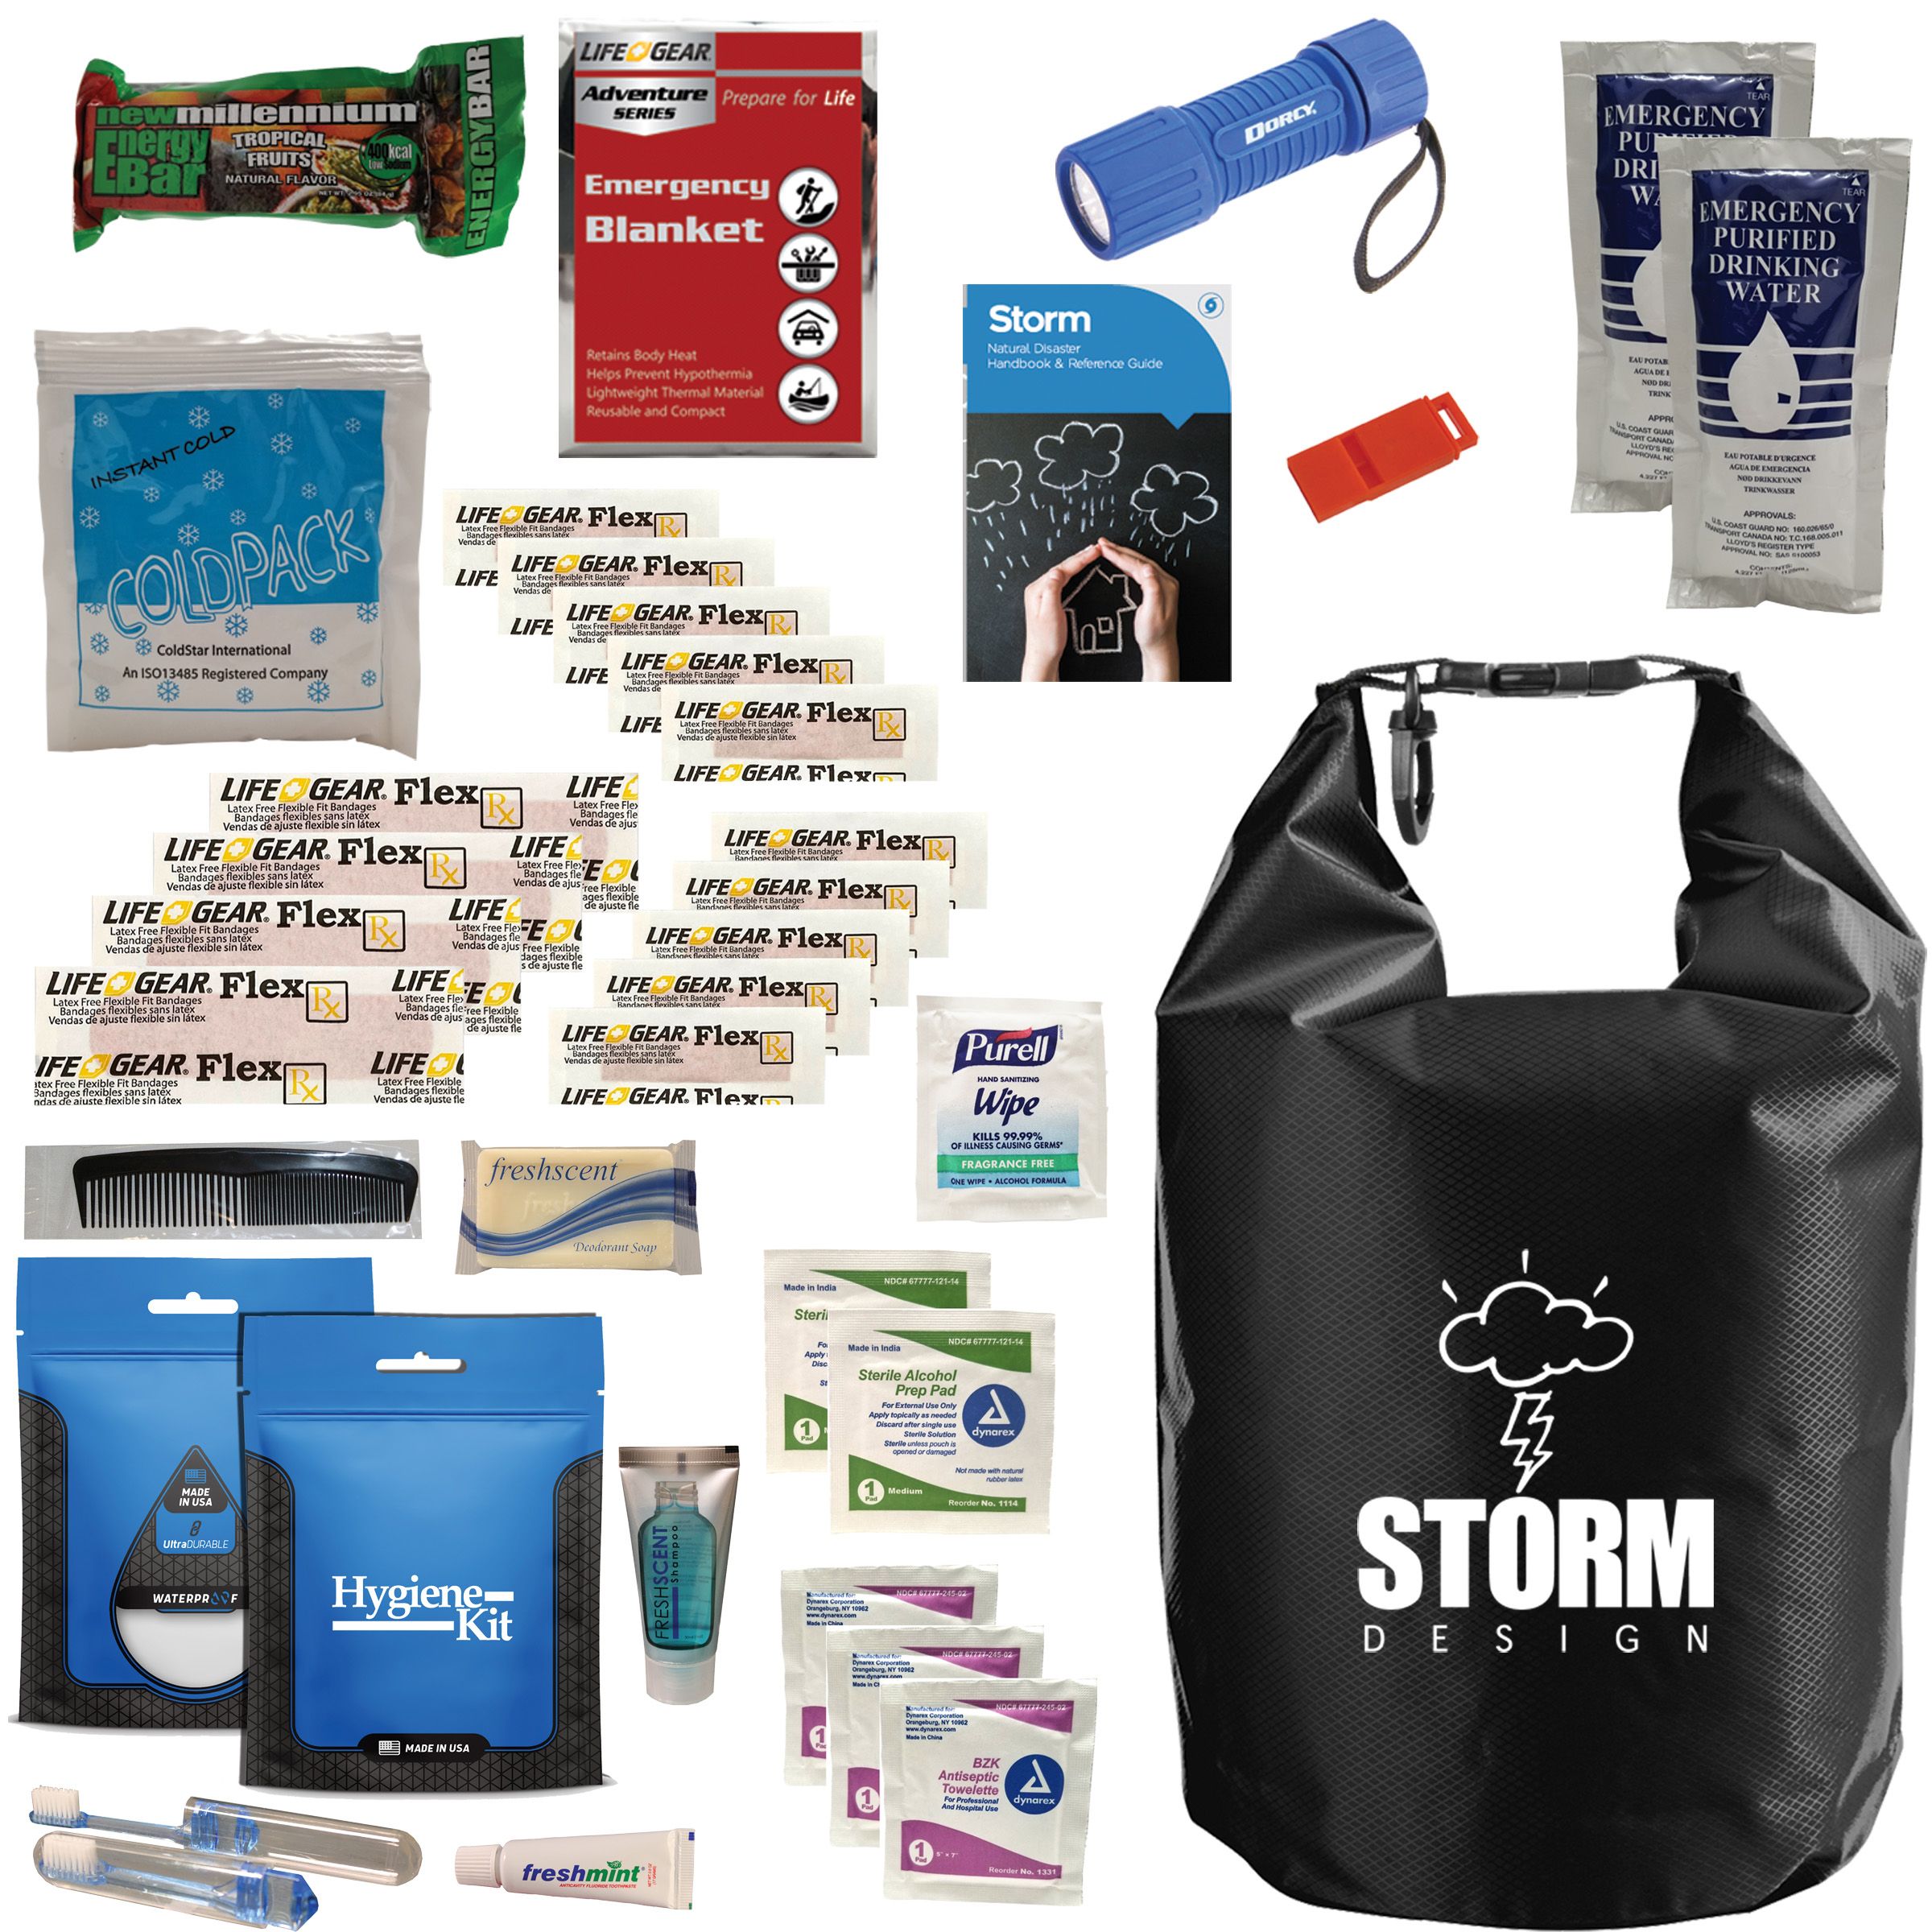 black bag with "storm design" on the front and safety supplies 